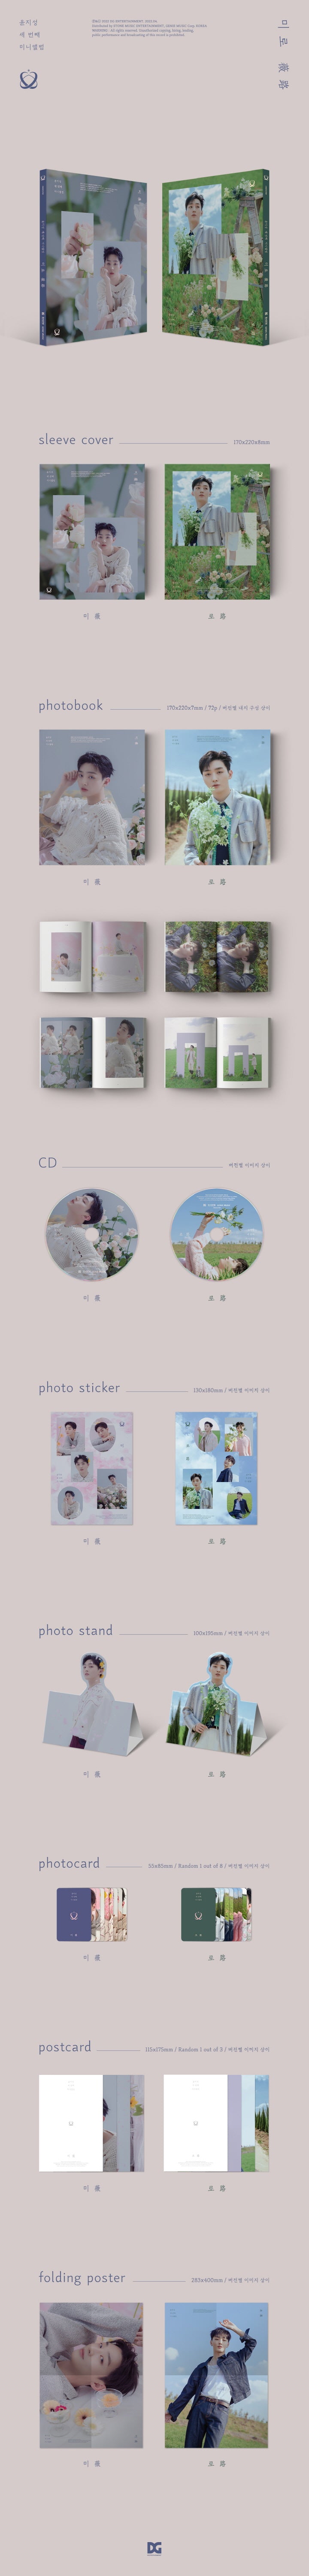 1 CD
1 Photo Book (72 pages)
1 Photo Sticker
1 Photo Stand
1 Photo Card (random out of 8 types)
1 Postcard (random out of ...